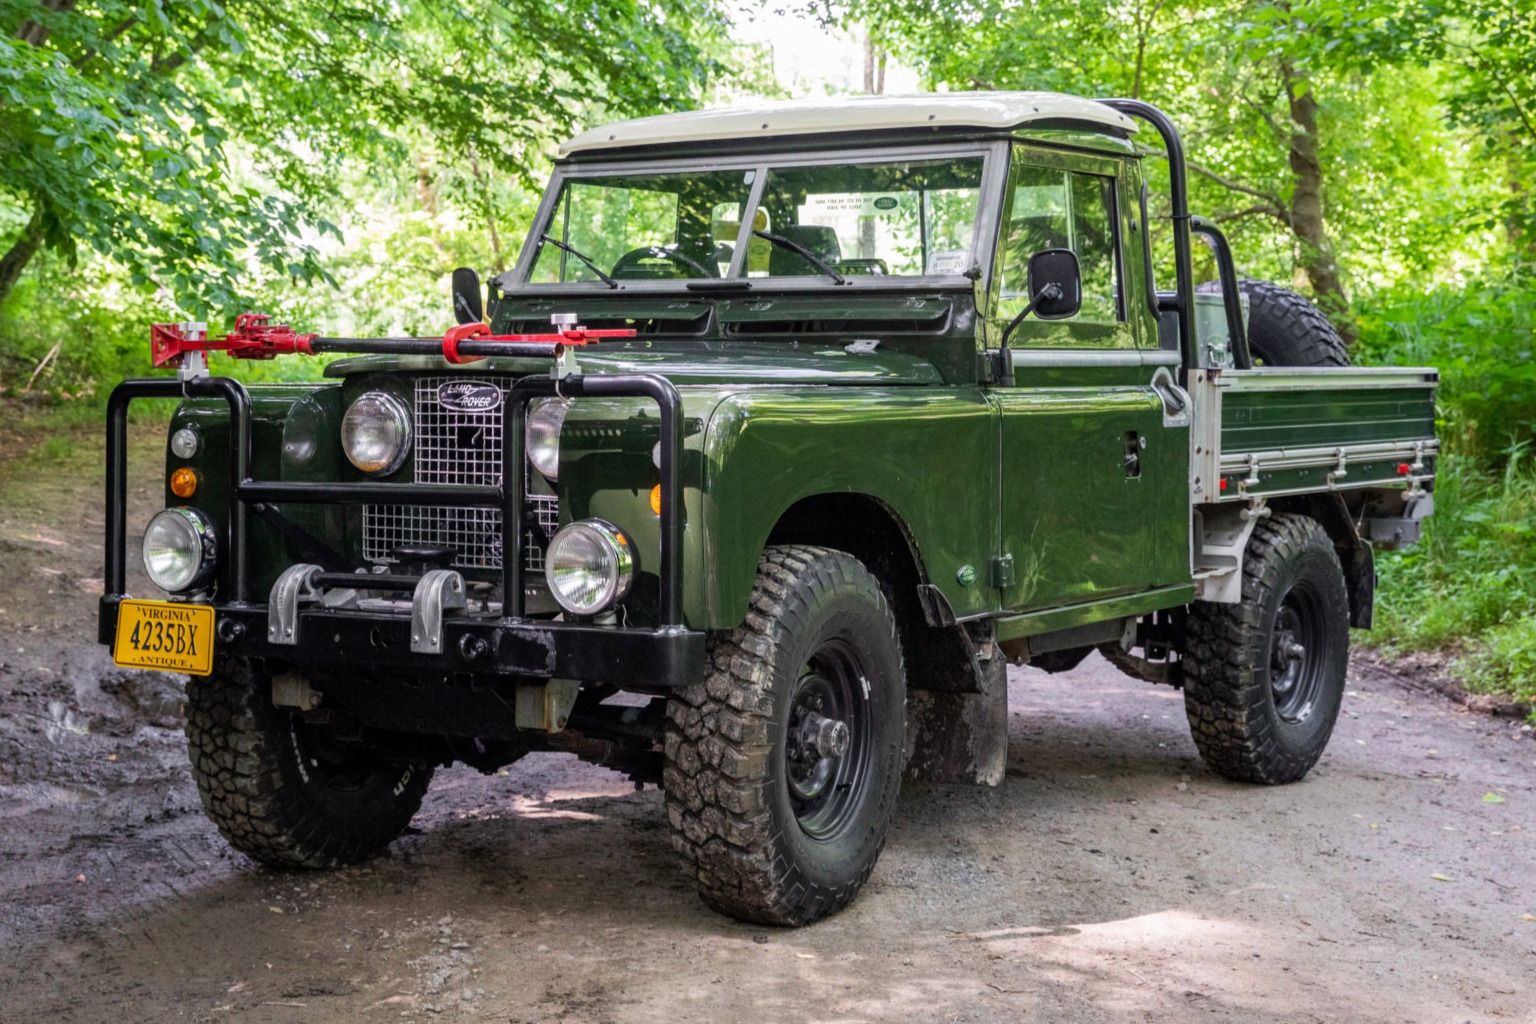 Floreren ontploffing Oh jee Rover Land Rover 88 And 109 Series Ii (1958-60) - Amazing Classic Cars